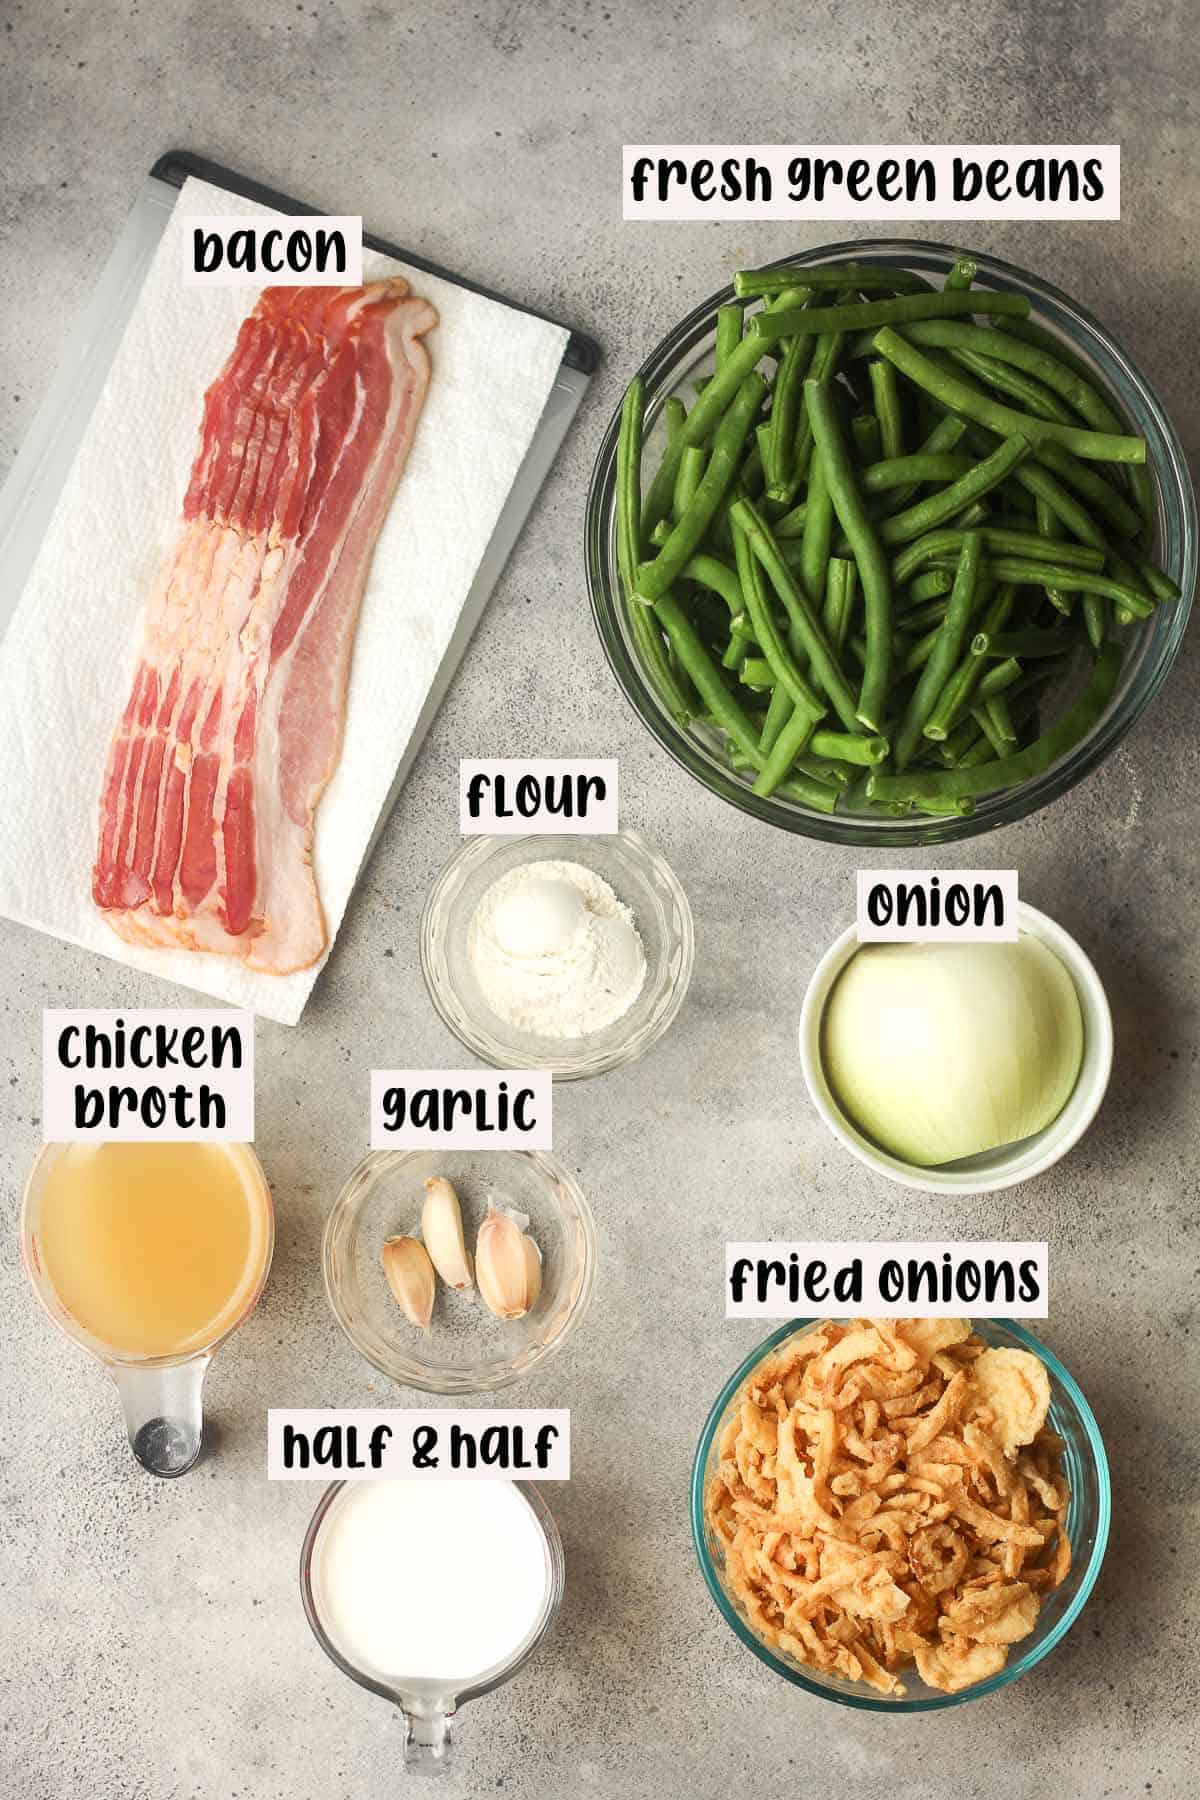 Labeled ingredients for fresh green bean casserole.